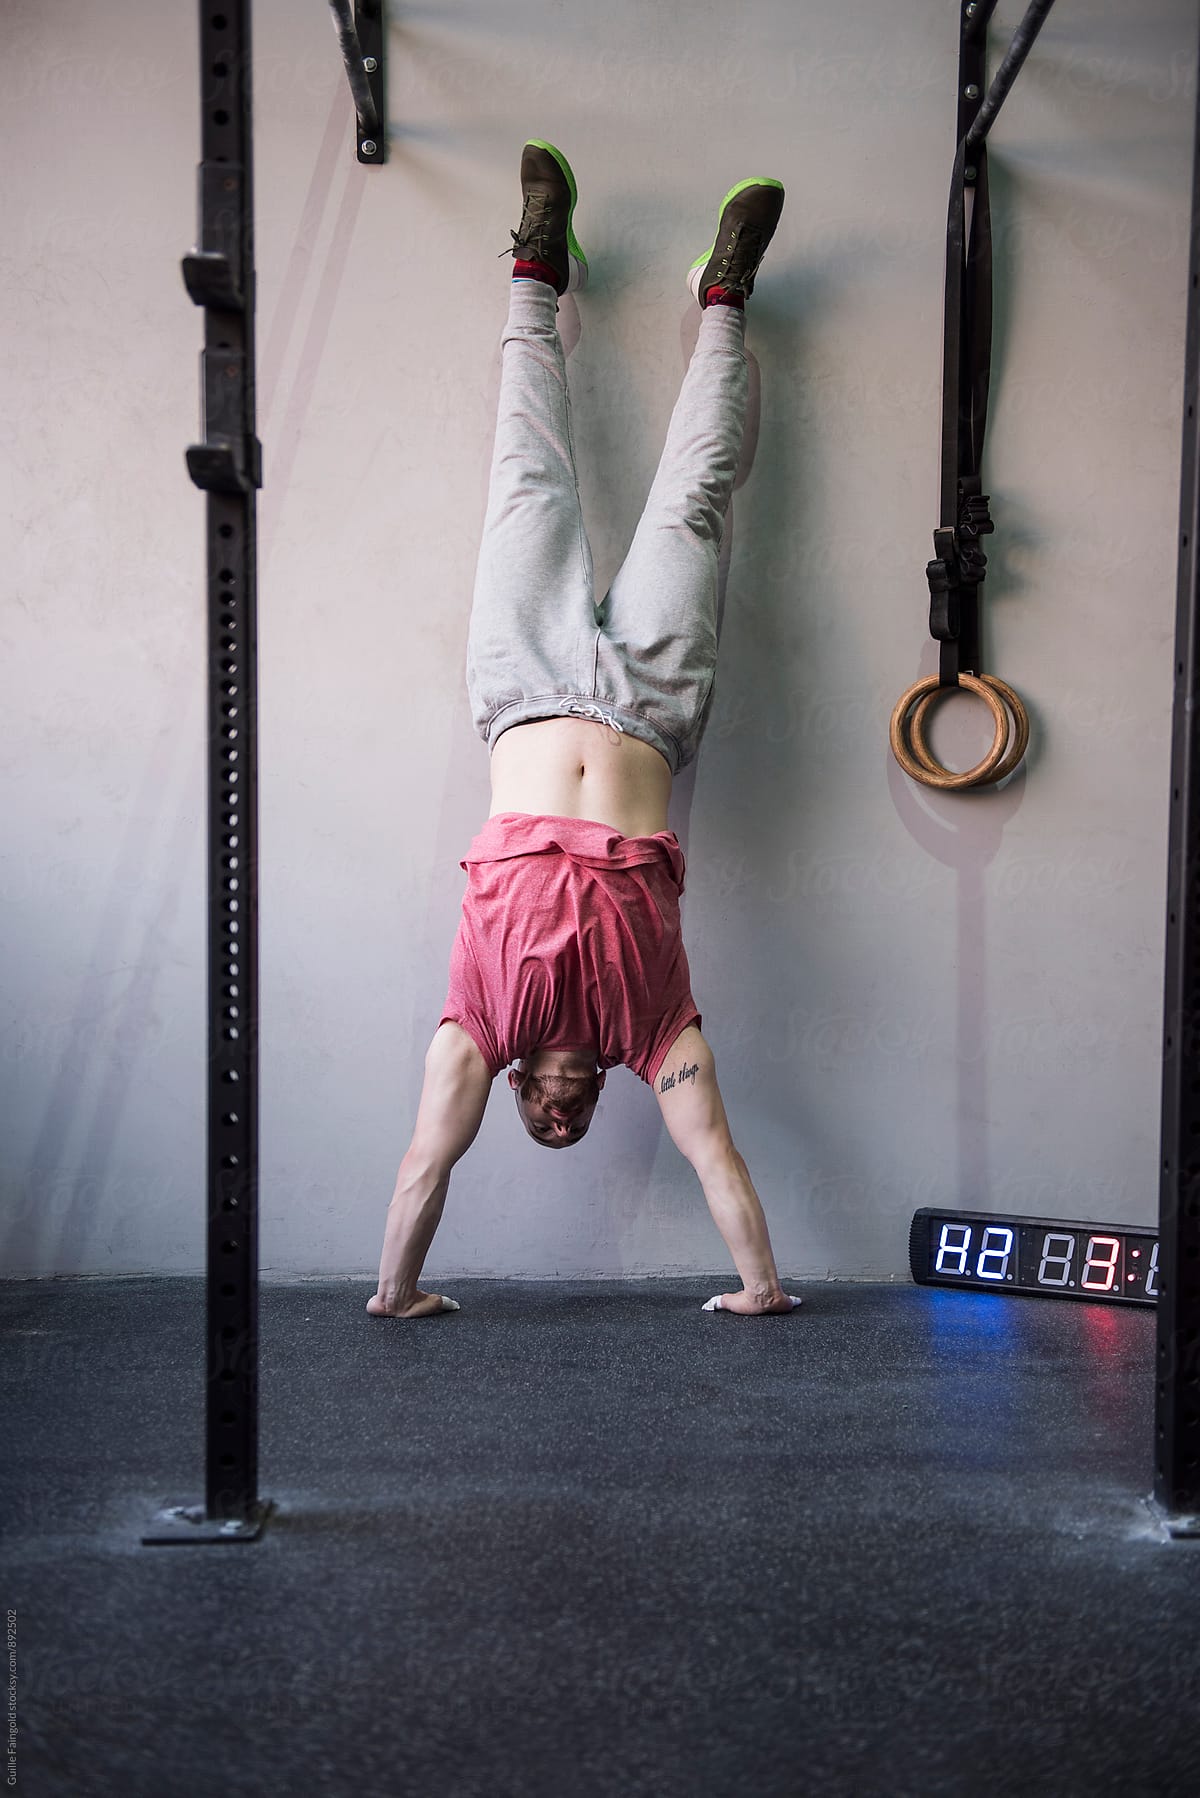 Man does handstand close to wall.